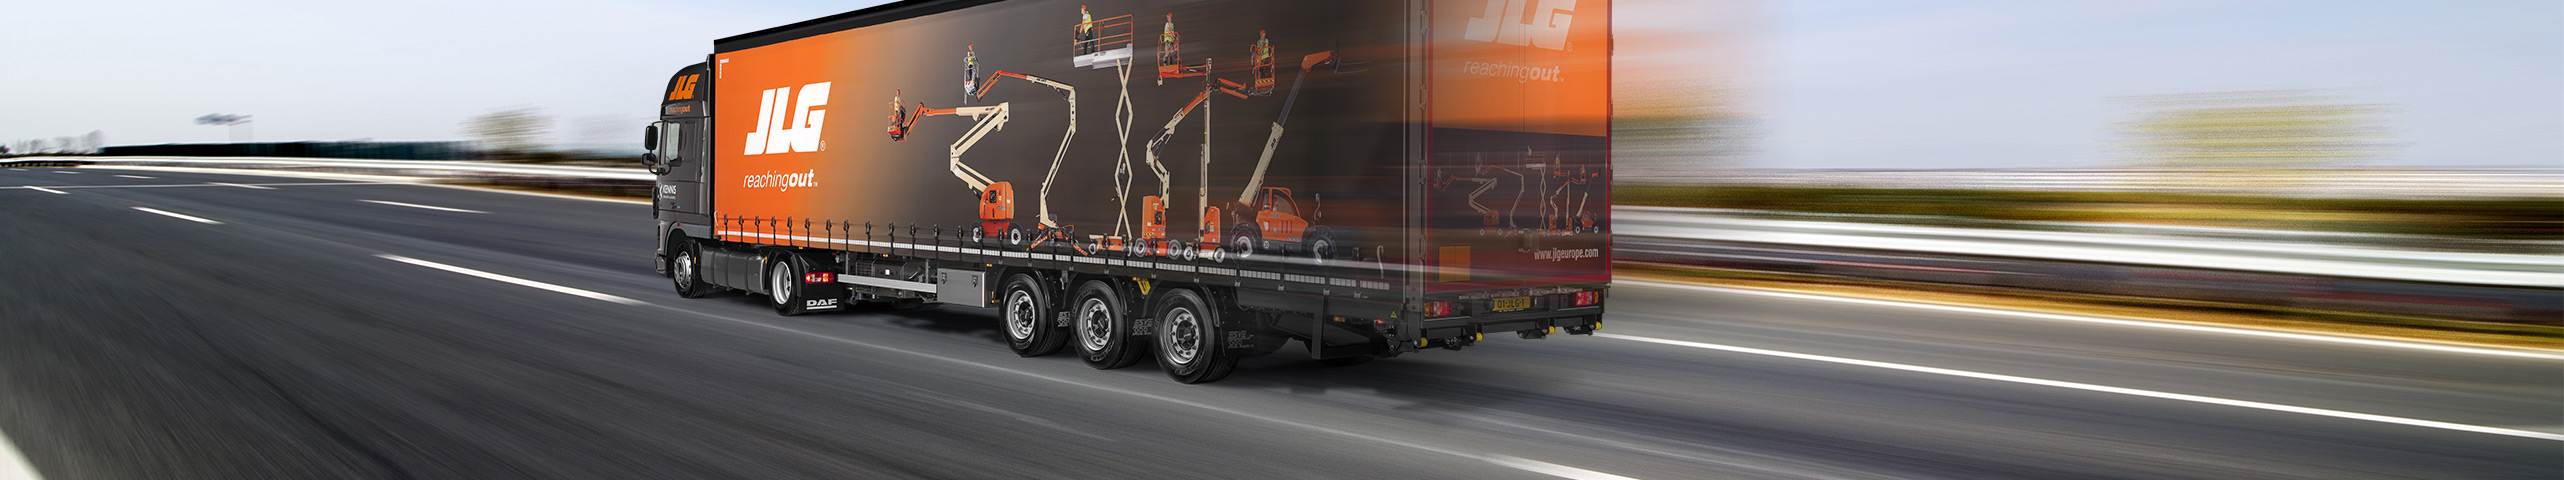 The JLG Demo Truck is touring Europe